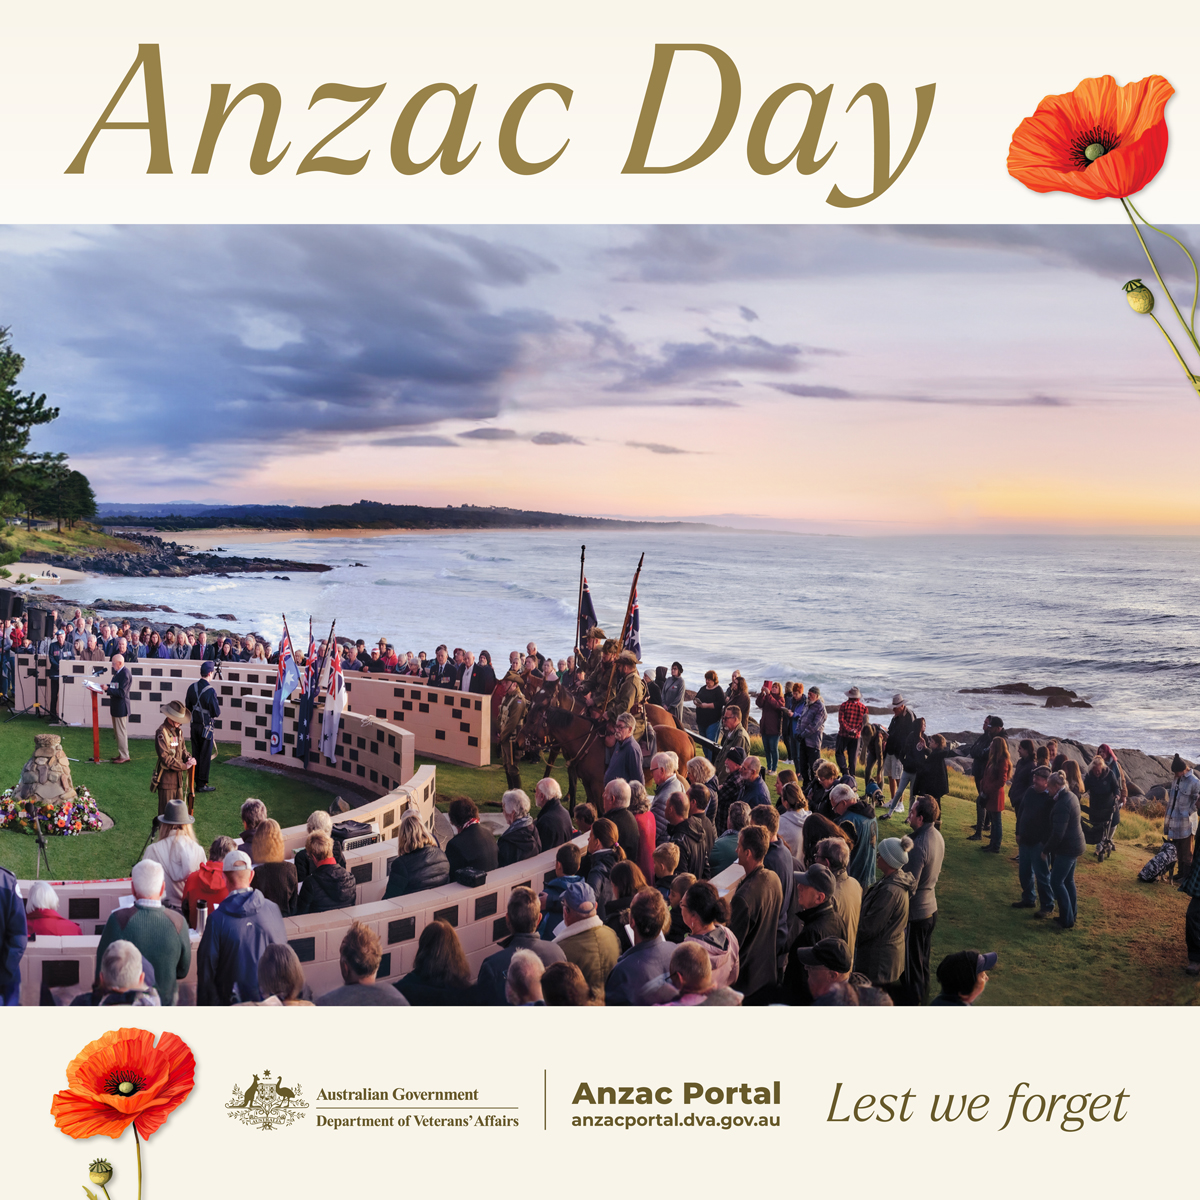 On #ANZACDay we commemorate the 🇦🇺 & 🇳🇿 Army Corps landings at Gallipoli in 1915 #LestWeForget. We also pay respect to those who have served & continue to serve in military & peacekeeping operations around the world